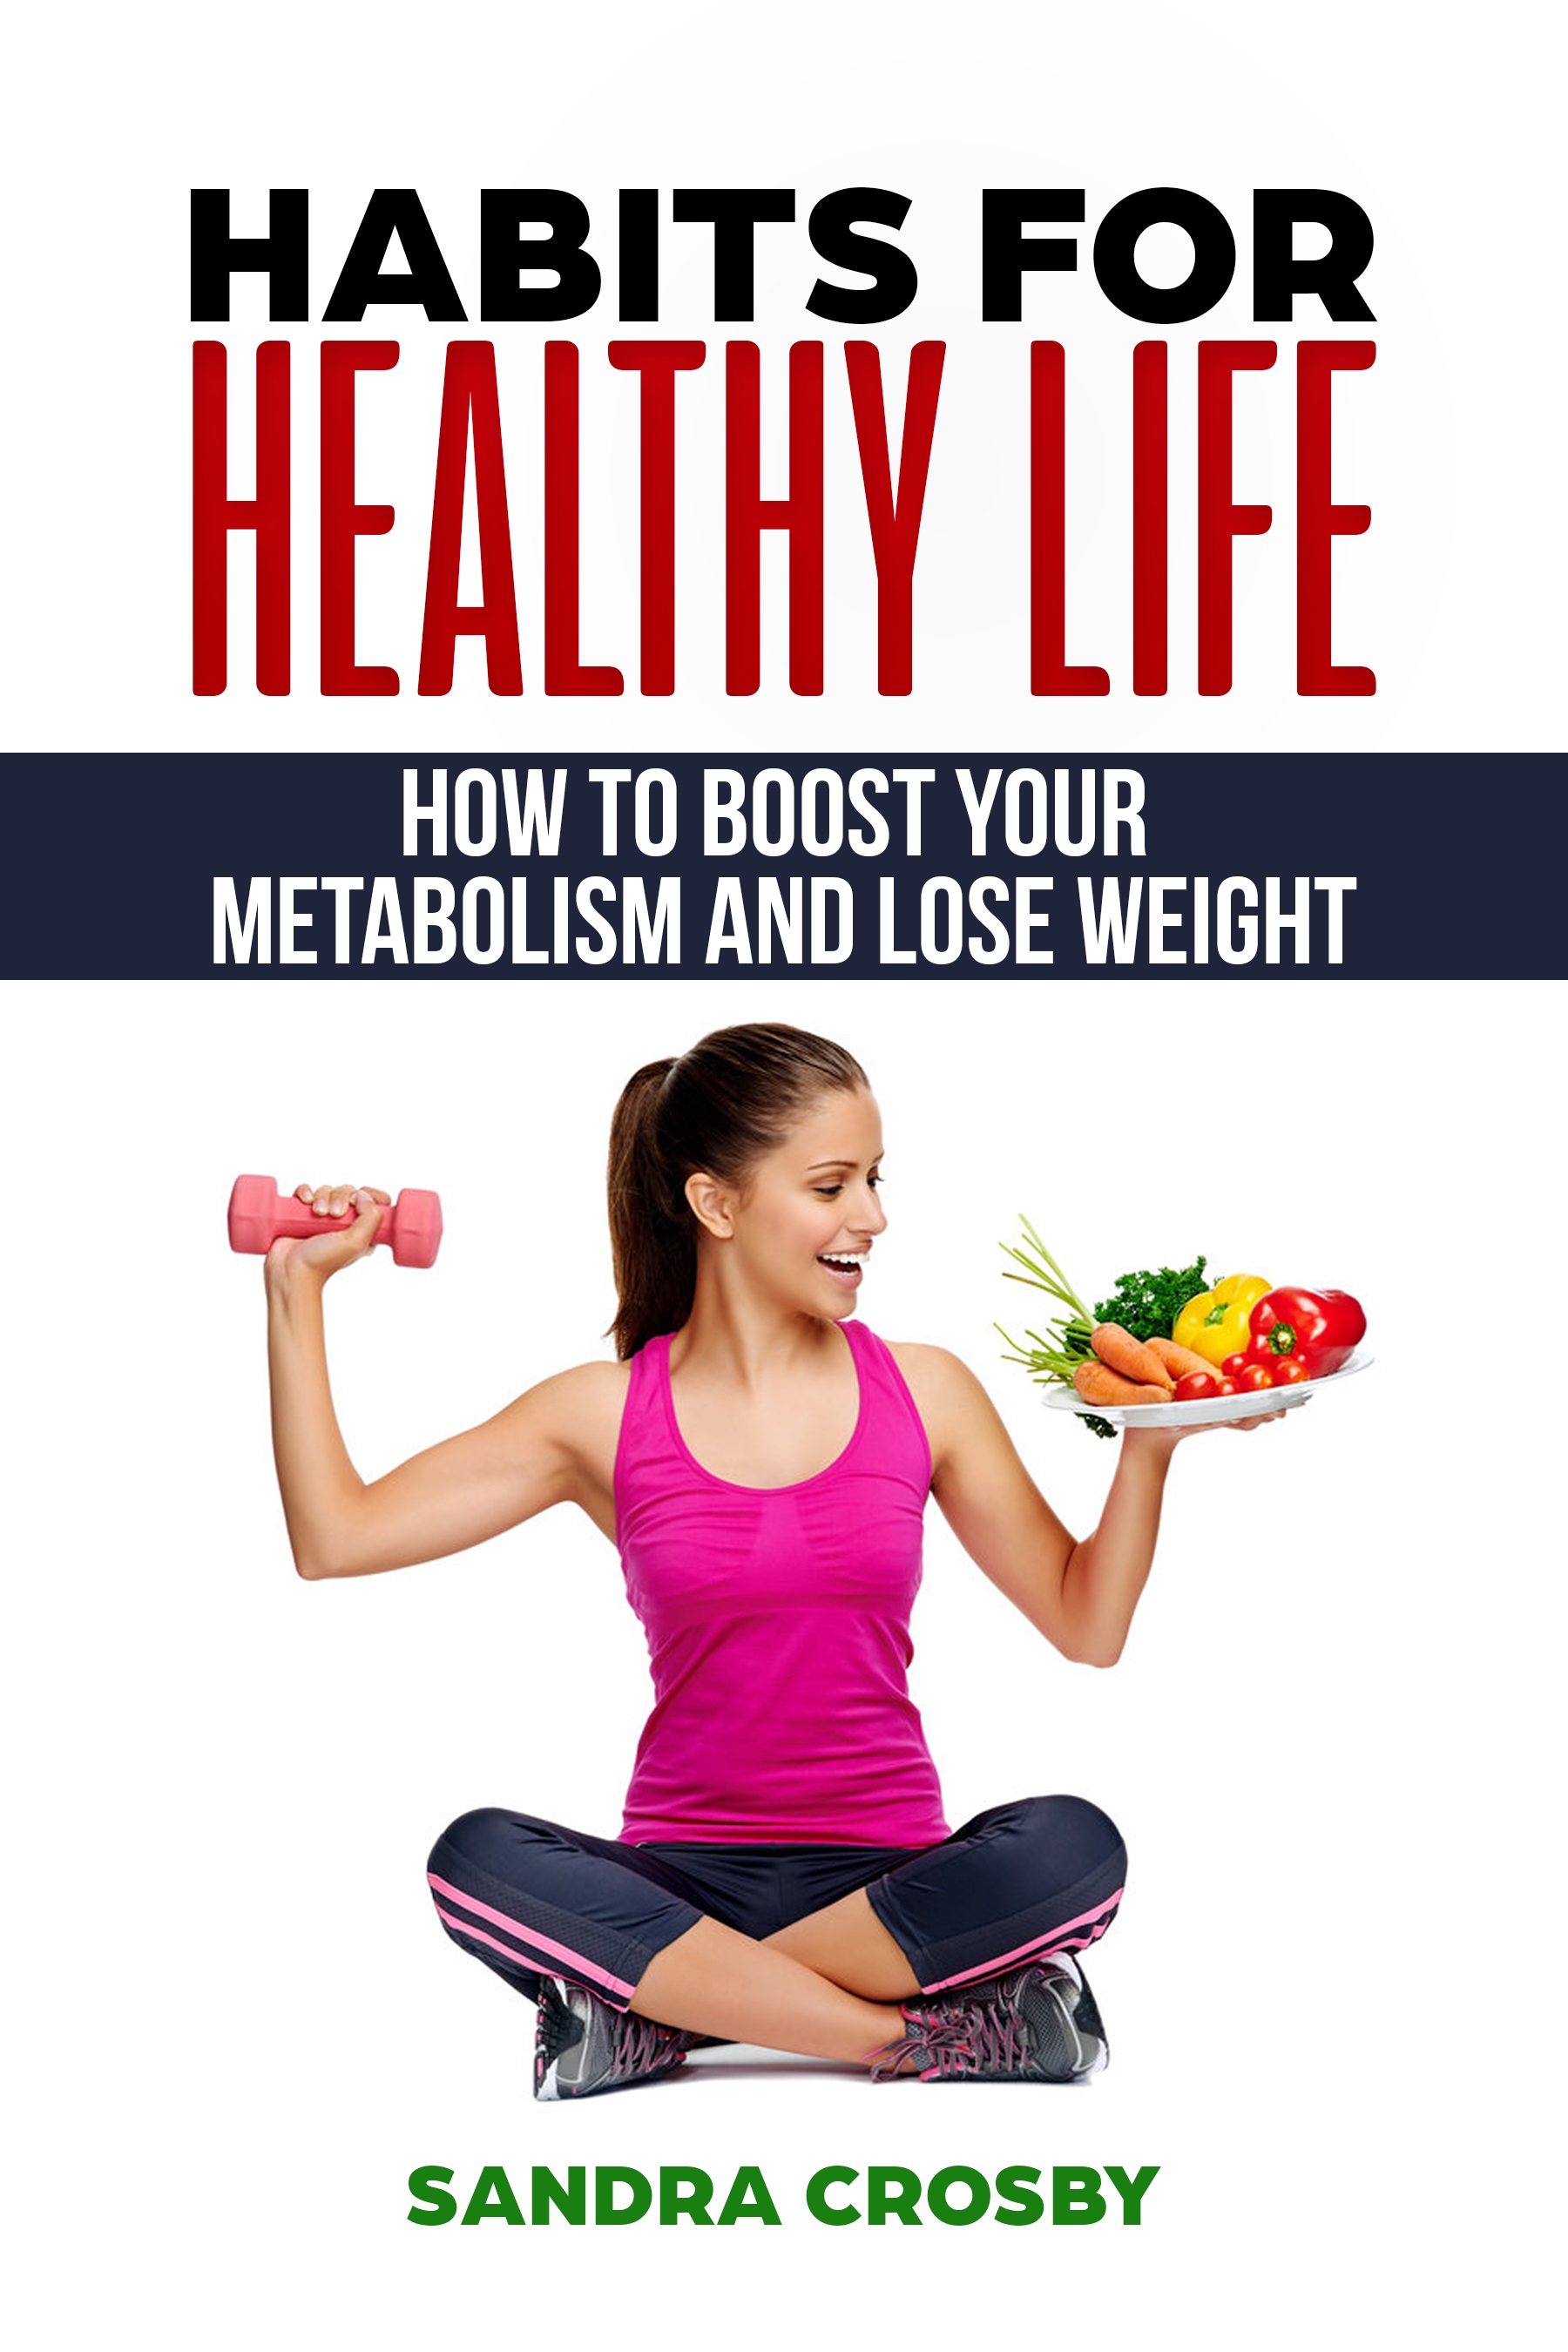 FREE: Habits for Healthy Life: How to Boost Your Metabolism and Lose Weight by Sandra Crosby